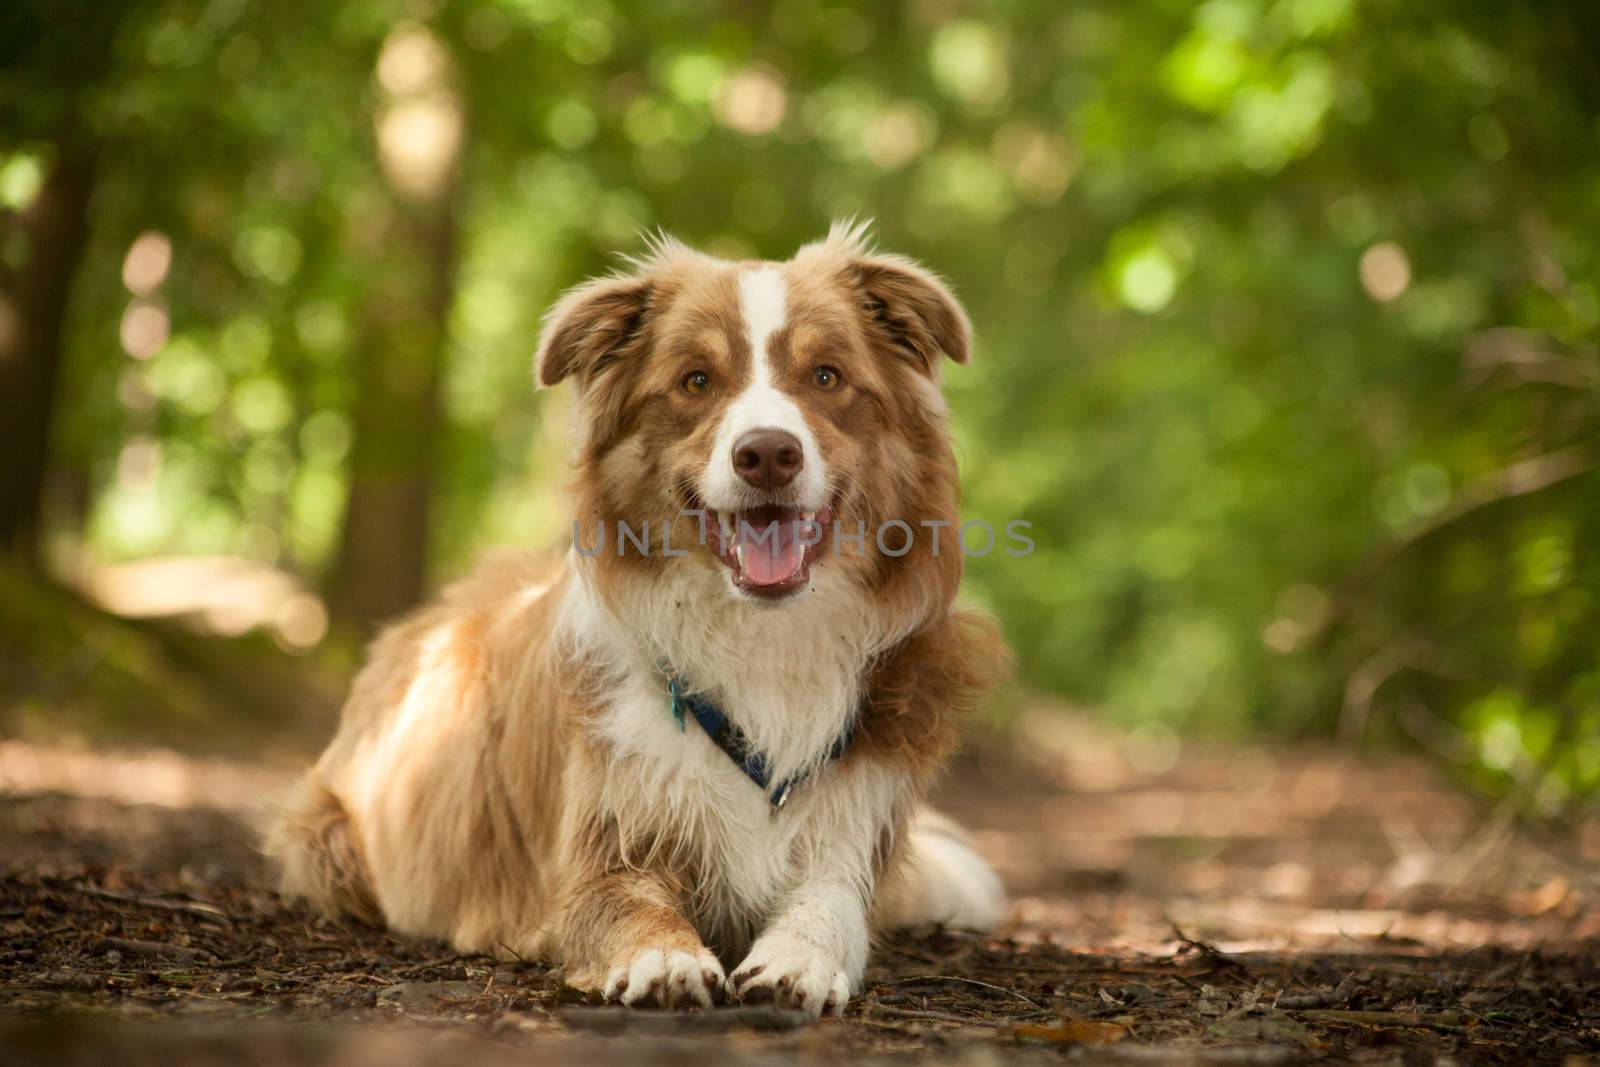 Happy dog photographed outside in the forest